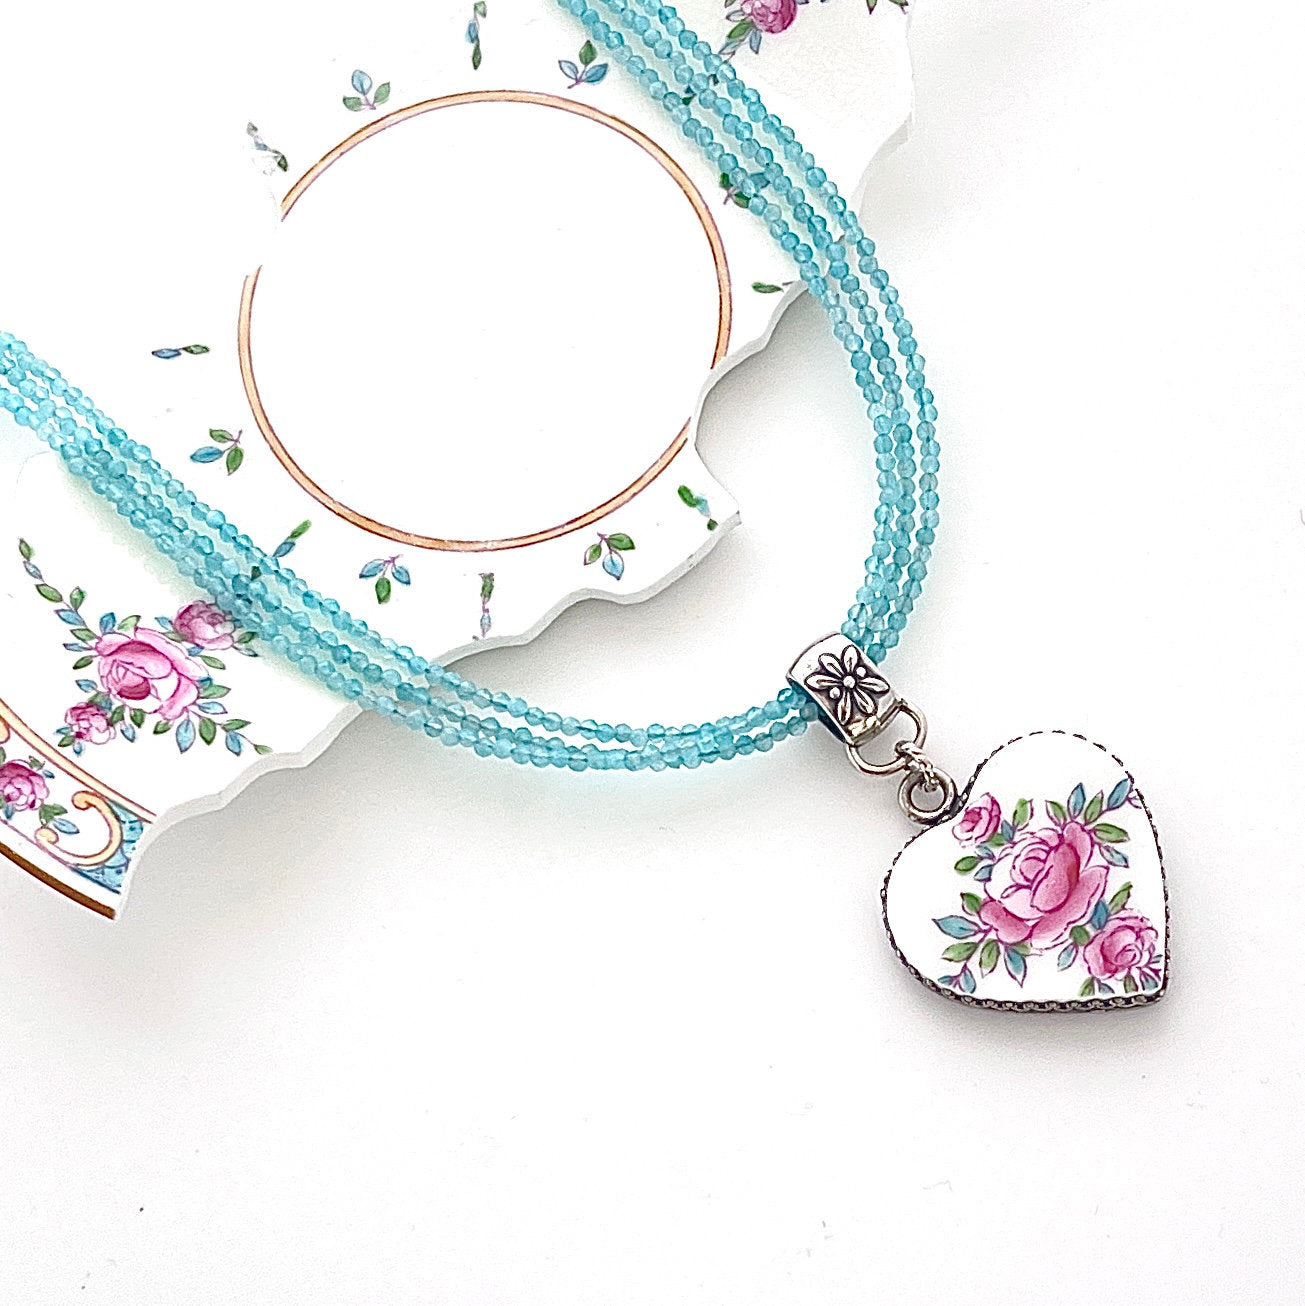 Minton China Persian Rose Broken China Jewelry, 20th Anniversary Gift for Wife, Romantic Heart Necklace